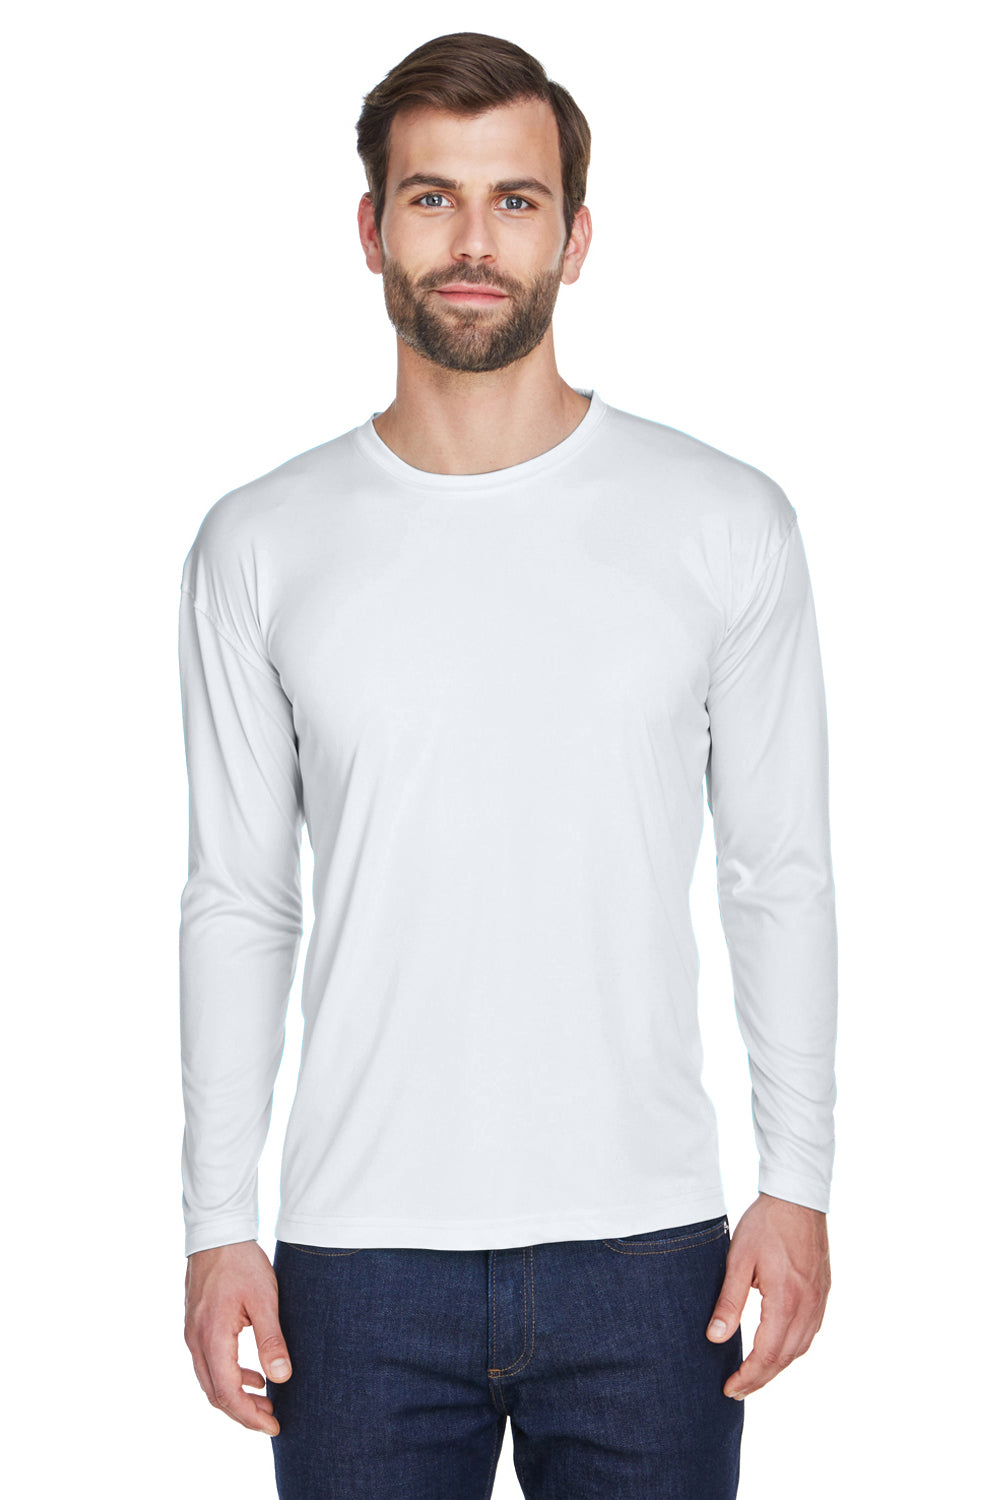 UltraClub 8422 Mens Cool & Dry Performance Moisture Wicking Long Sleeve Crewneck T-Shirt White Front